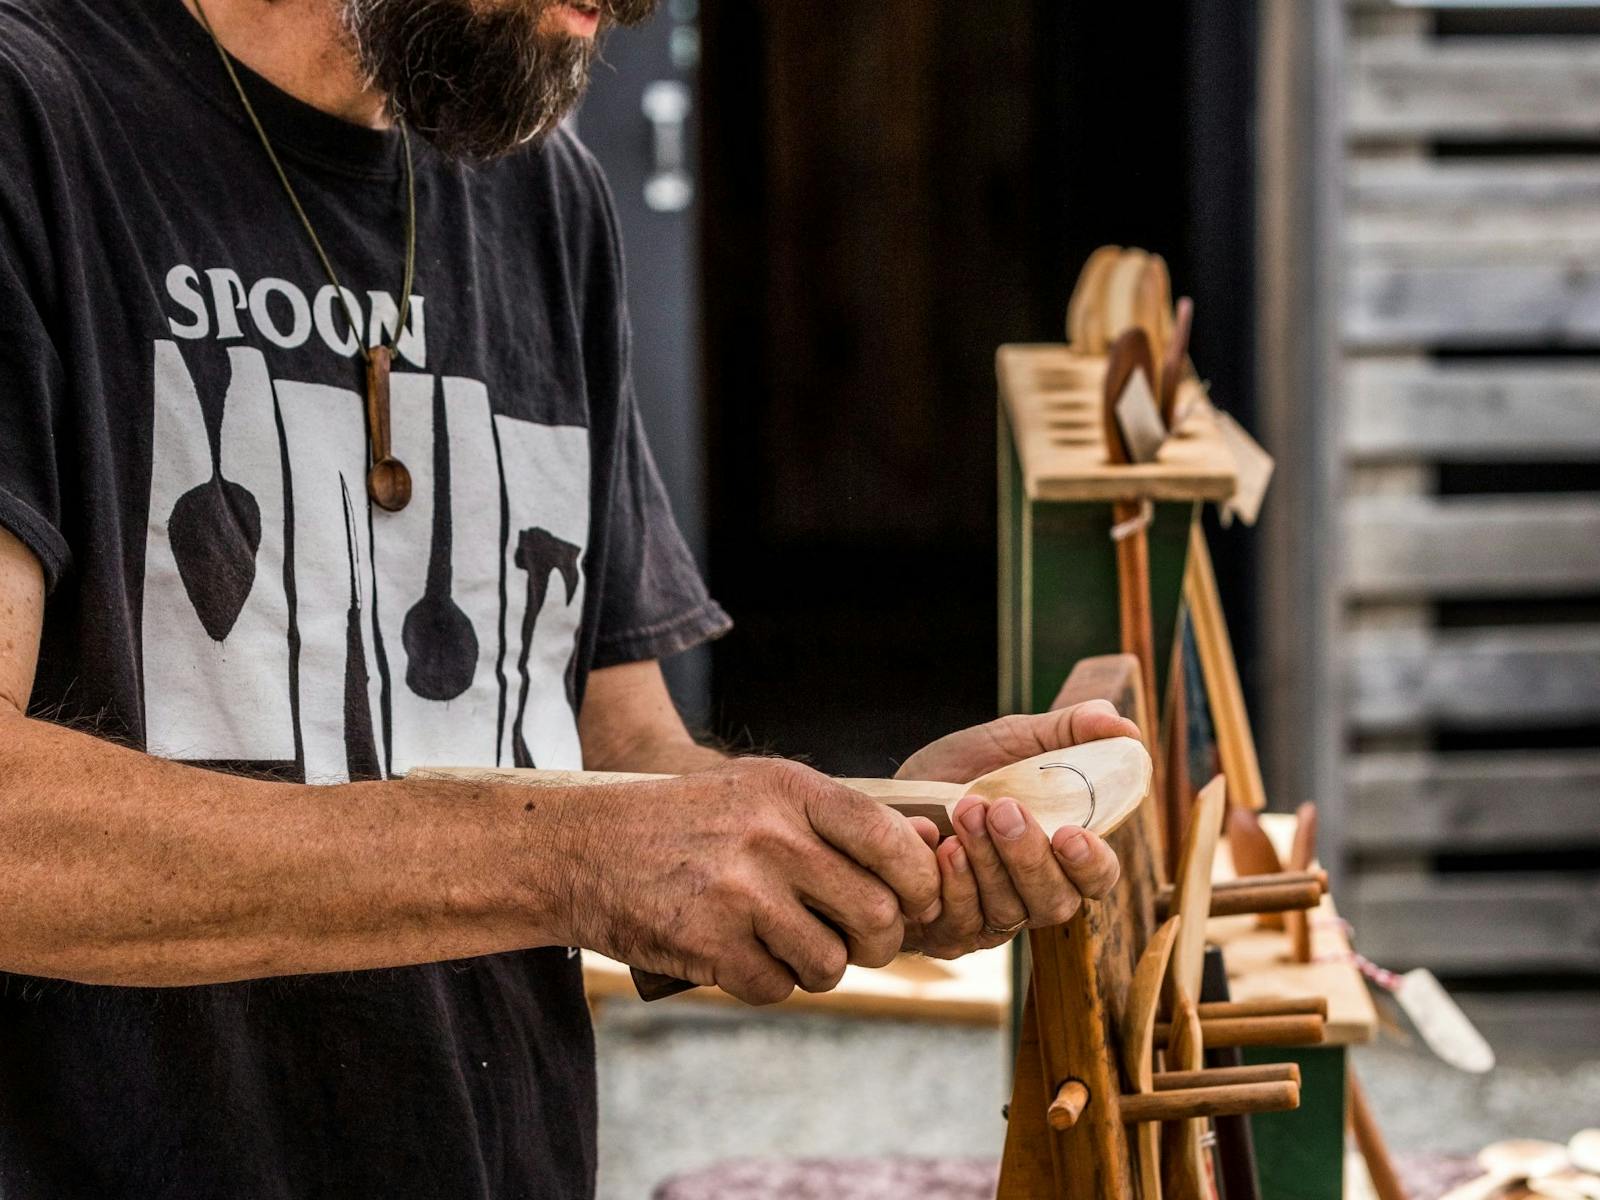 Hand carved spoons at Willie Smith's Apple Shed Market